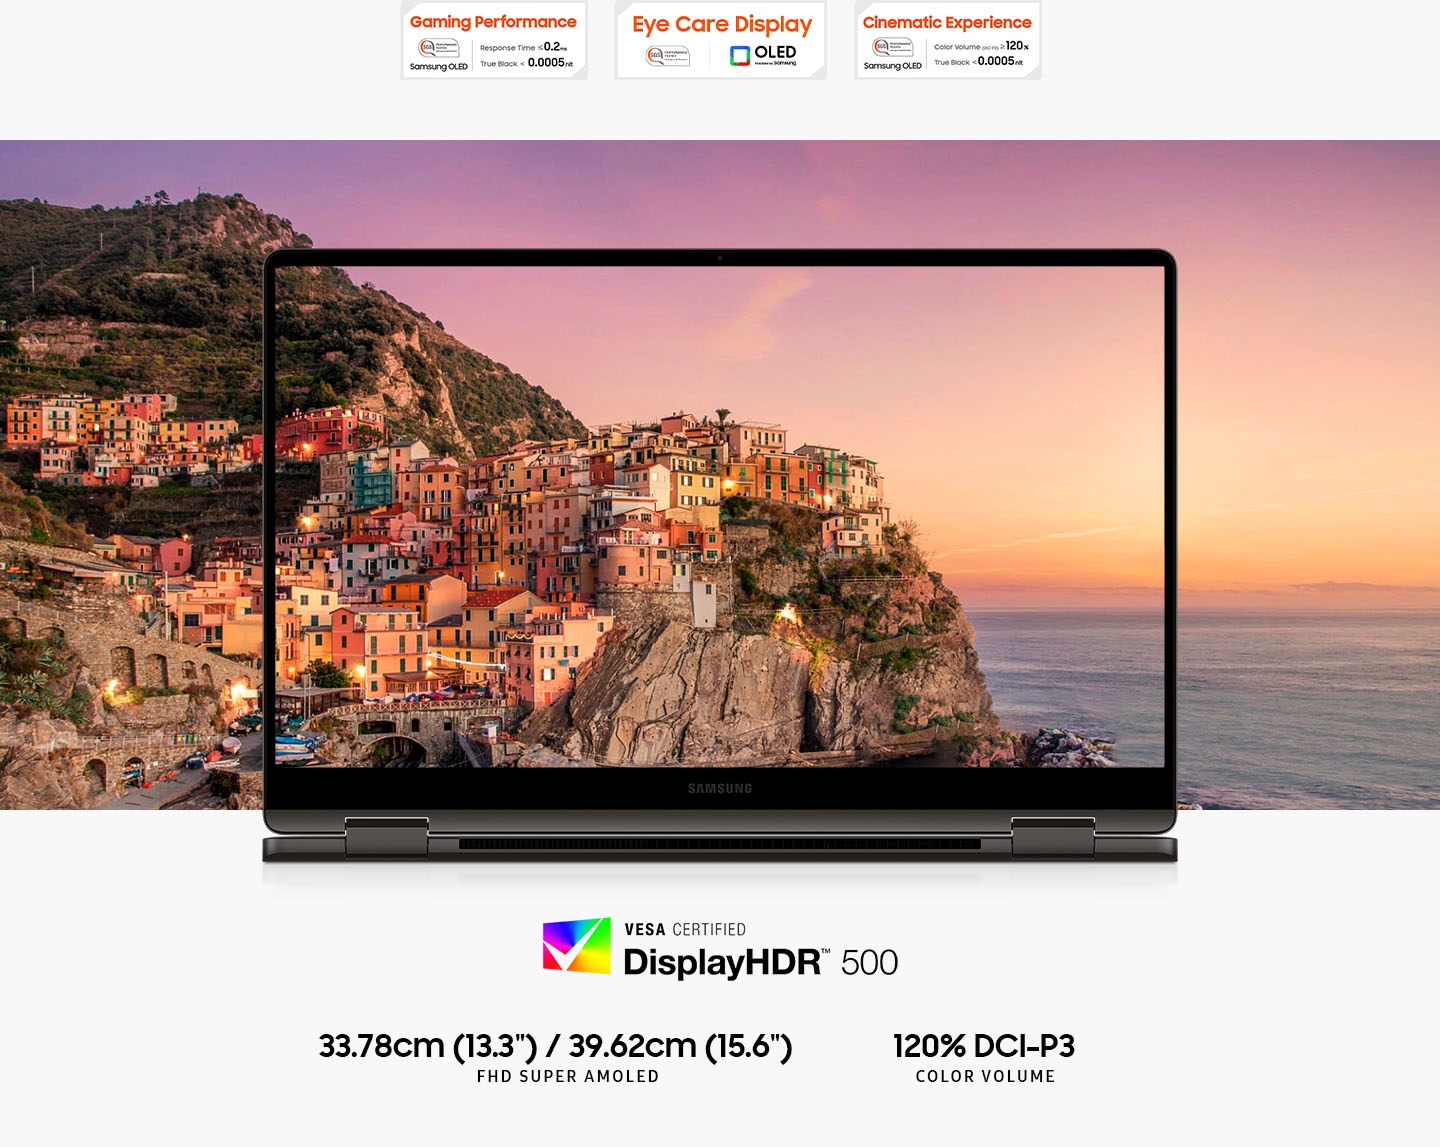 A colorful landscape of a town by the sea at sunset is shown on the screen of Galaxy Book3 360 with the picture extending outside the screen in all directions. Above are three SGS certifications. The Gaming Performance certification has the text Response Time less than or equal to 0.2ms, True Black less than 0.0005nit. SGS Performance tested Samsung OLED. The Eye Care Display logo. SGS Performance tested. OLED provided by Samsung. The Cinematic Experience certification has the text Color Volume (DCI-P3) greater than or equal to 120%, True Black less than 0.0005nit. SGS Performance tested Samsung OLED. Below is a Vesa Certified DisplayHDR 500 logo. 13.3"/15.6" FHD SUPER AMOLED. 120% DCI-P3 COLOR VOLUME.